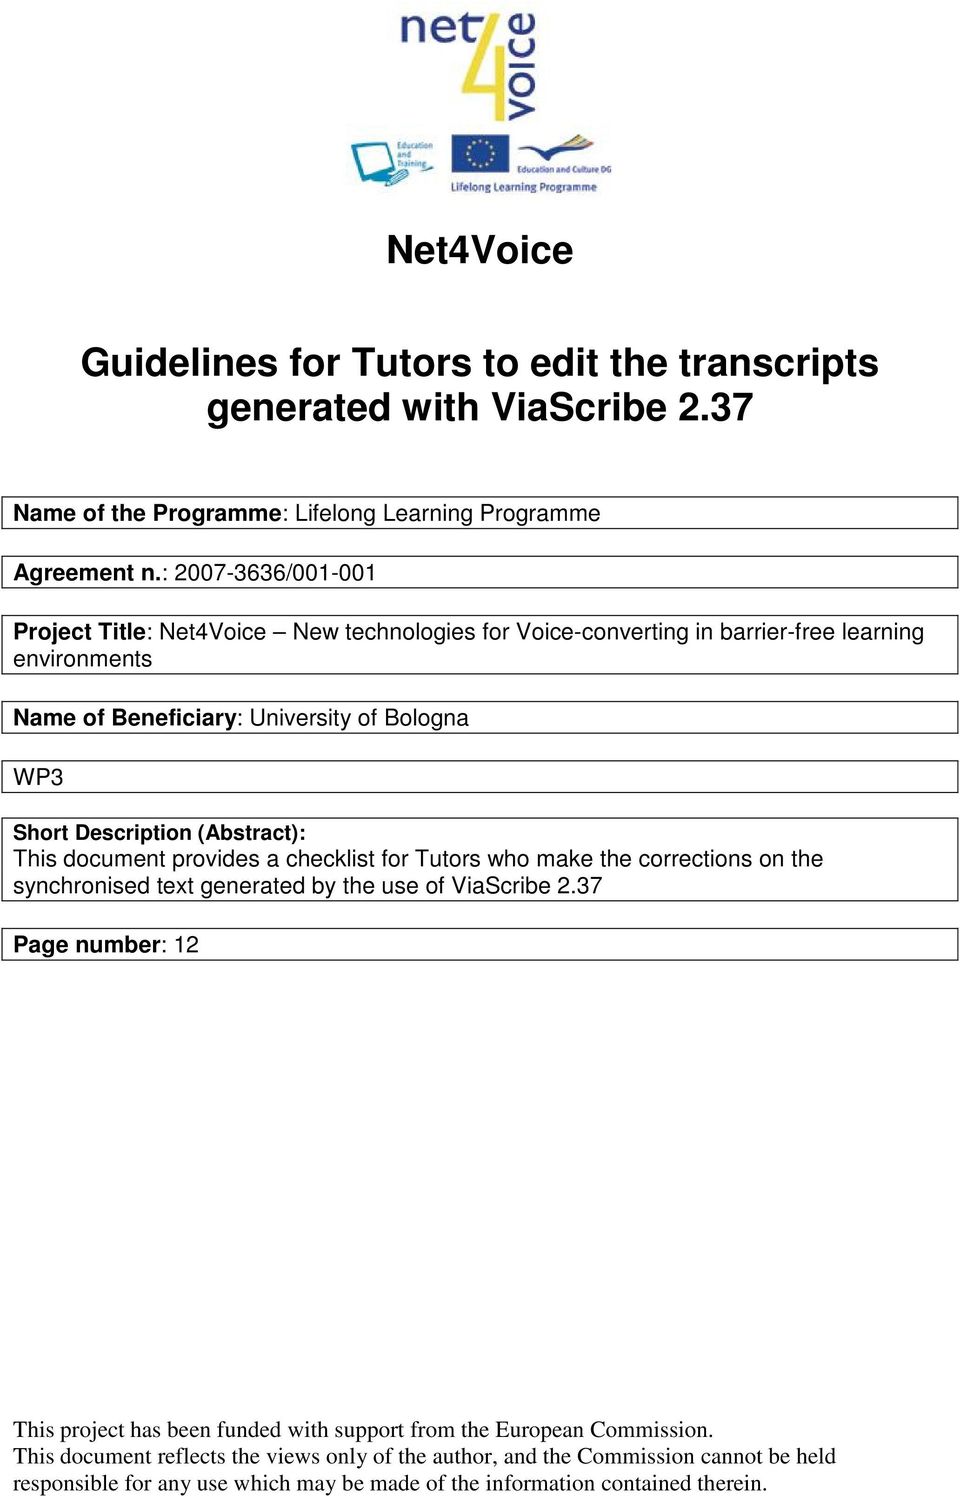 Description (Abstract): This document provides a checklist for Tutors who make the corrections on the synchronised text generated by the use of ViaScribe 2.